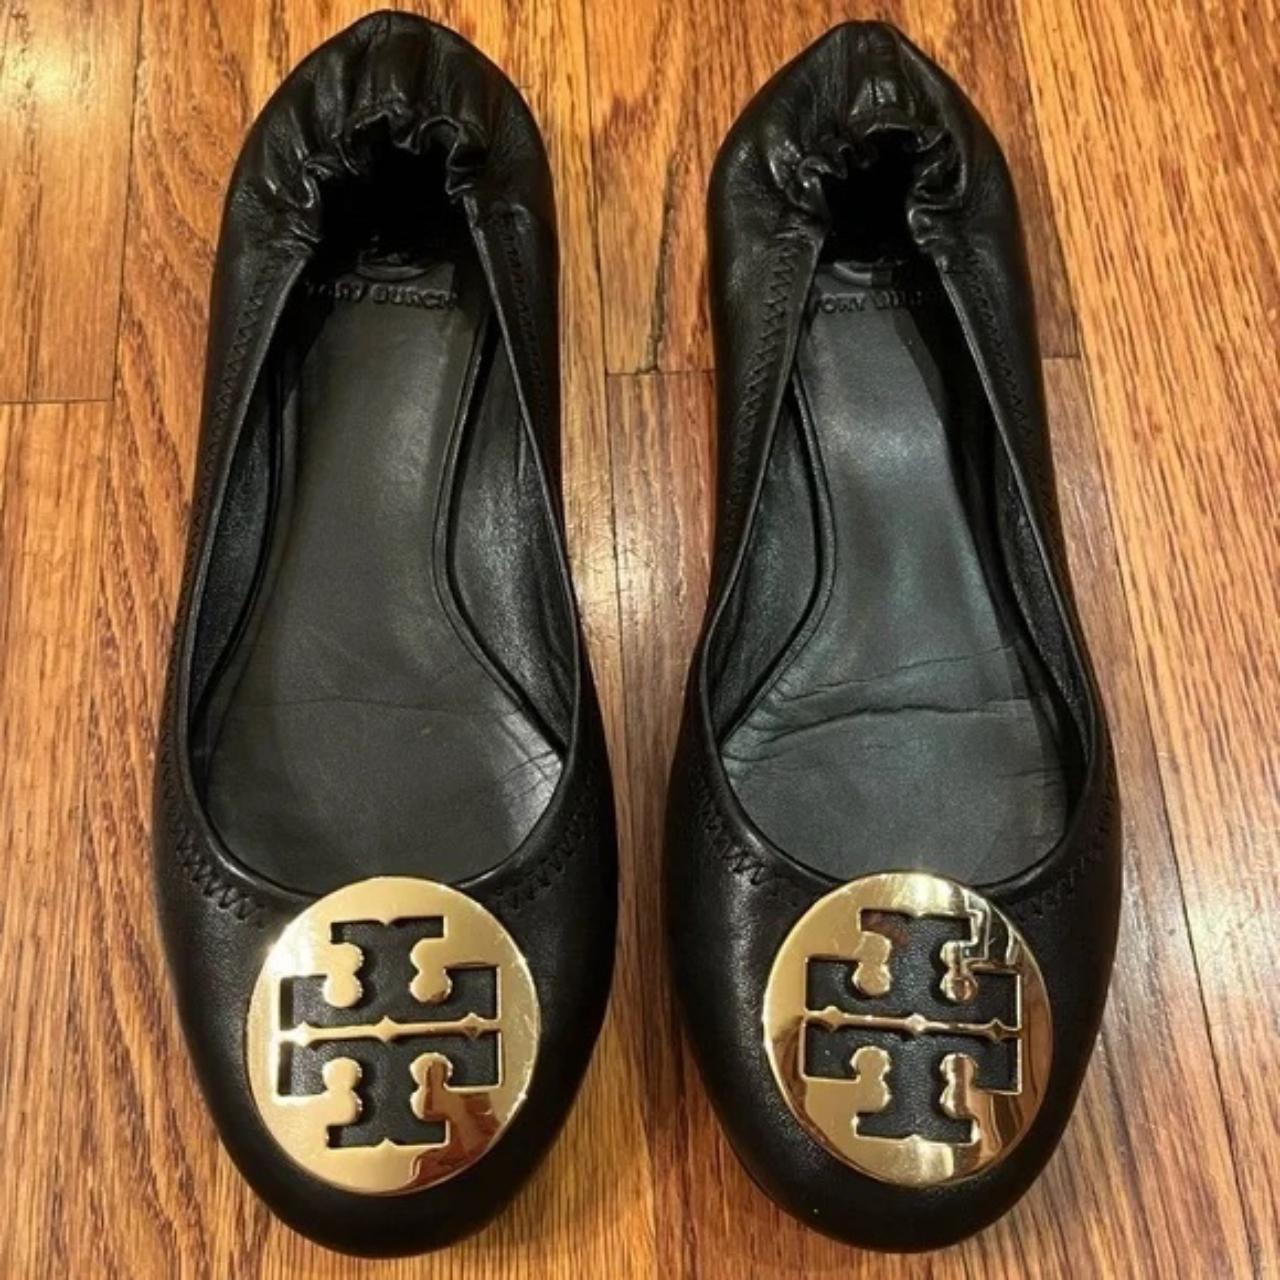 Tory Burch Women's Black and Gold Slippers | Depop